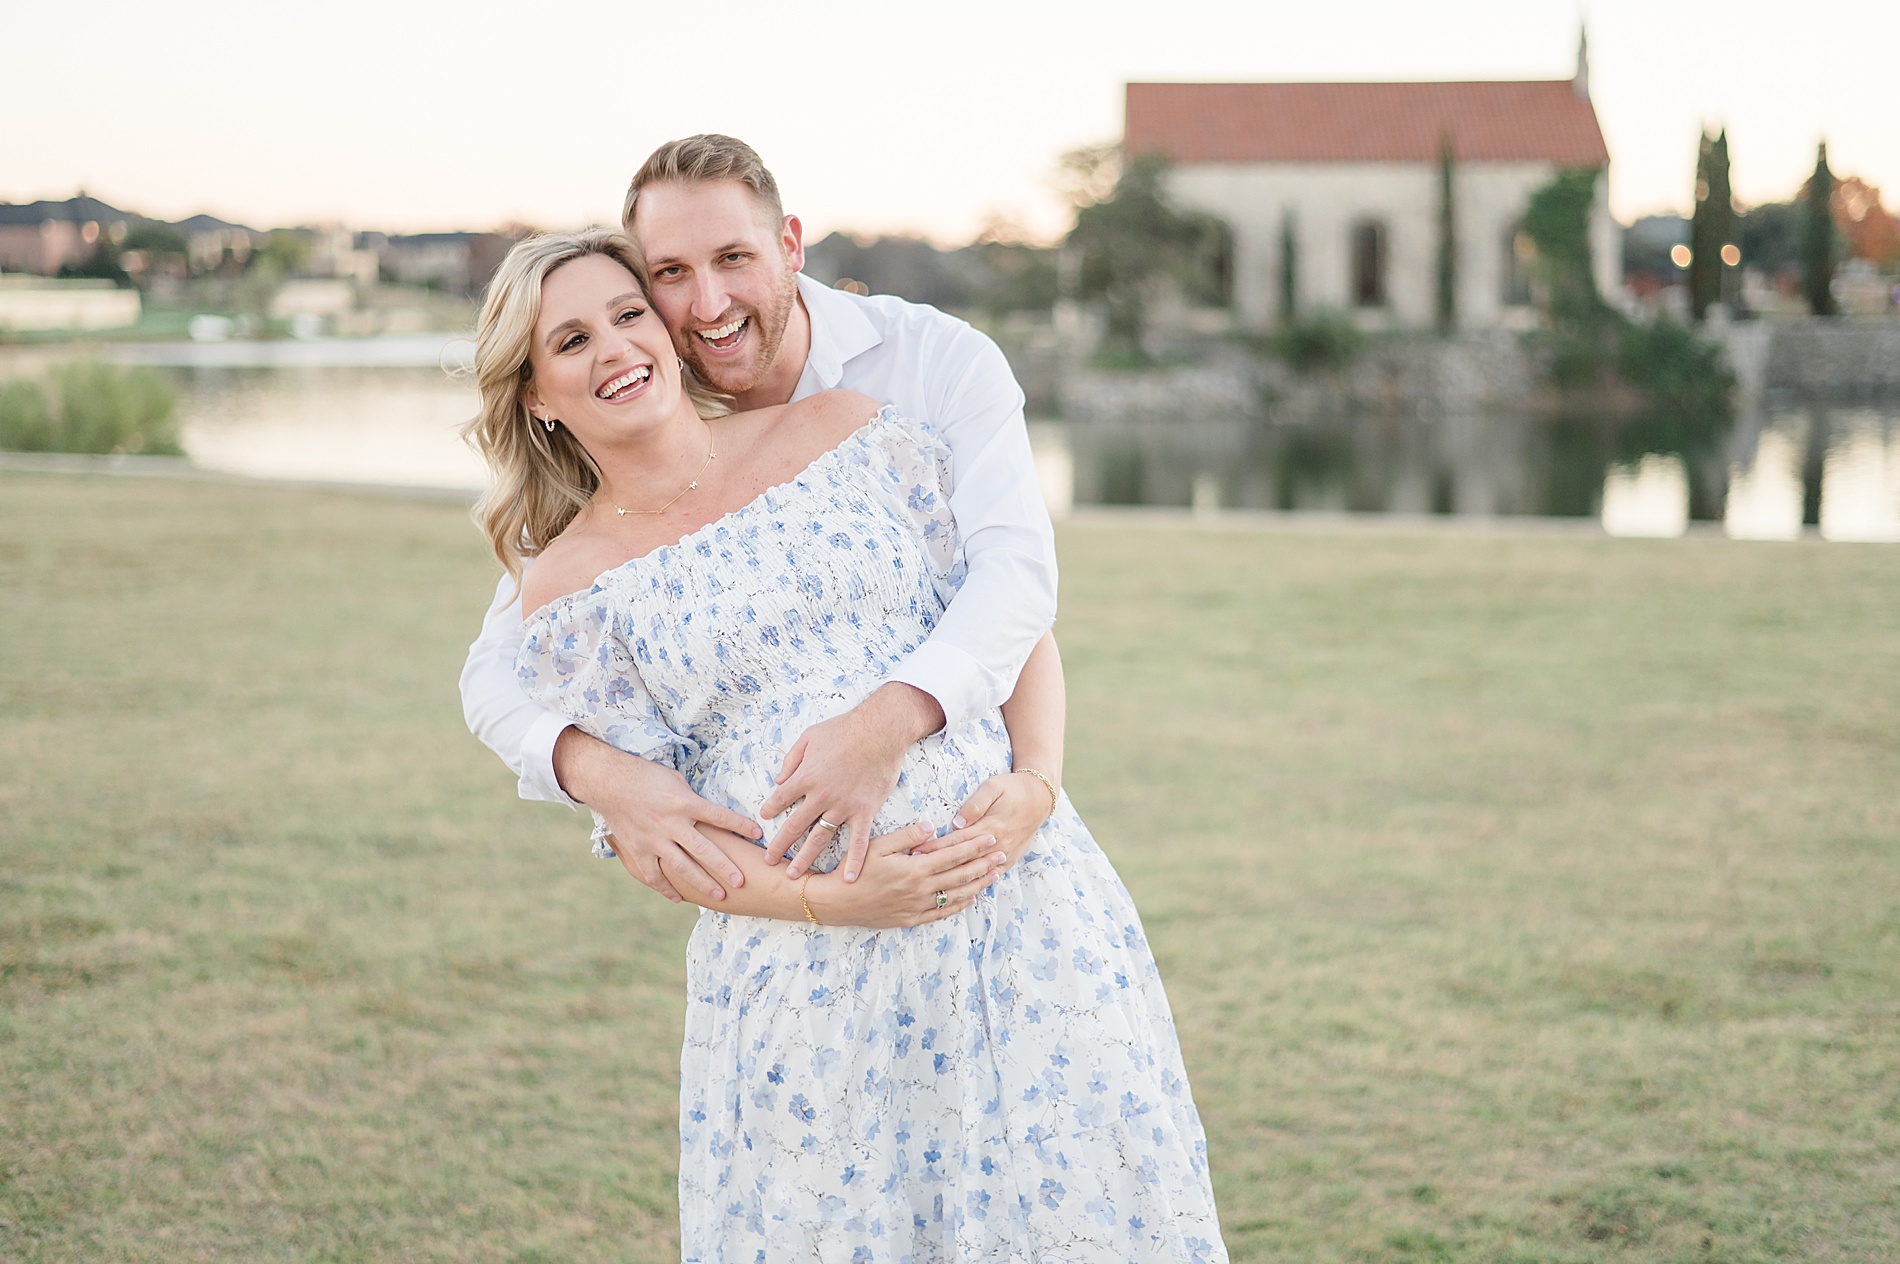 candid portraits of expectant couple during maternity session photographed by Lindsey Dutton Photography, a Dallas Family photographer
